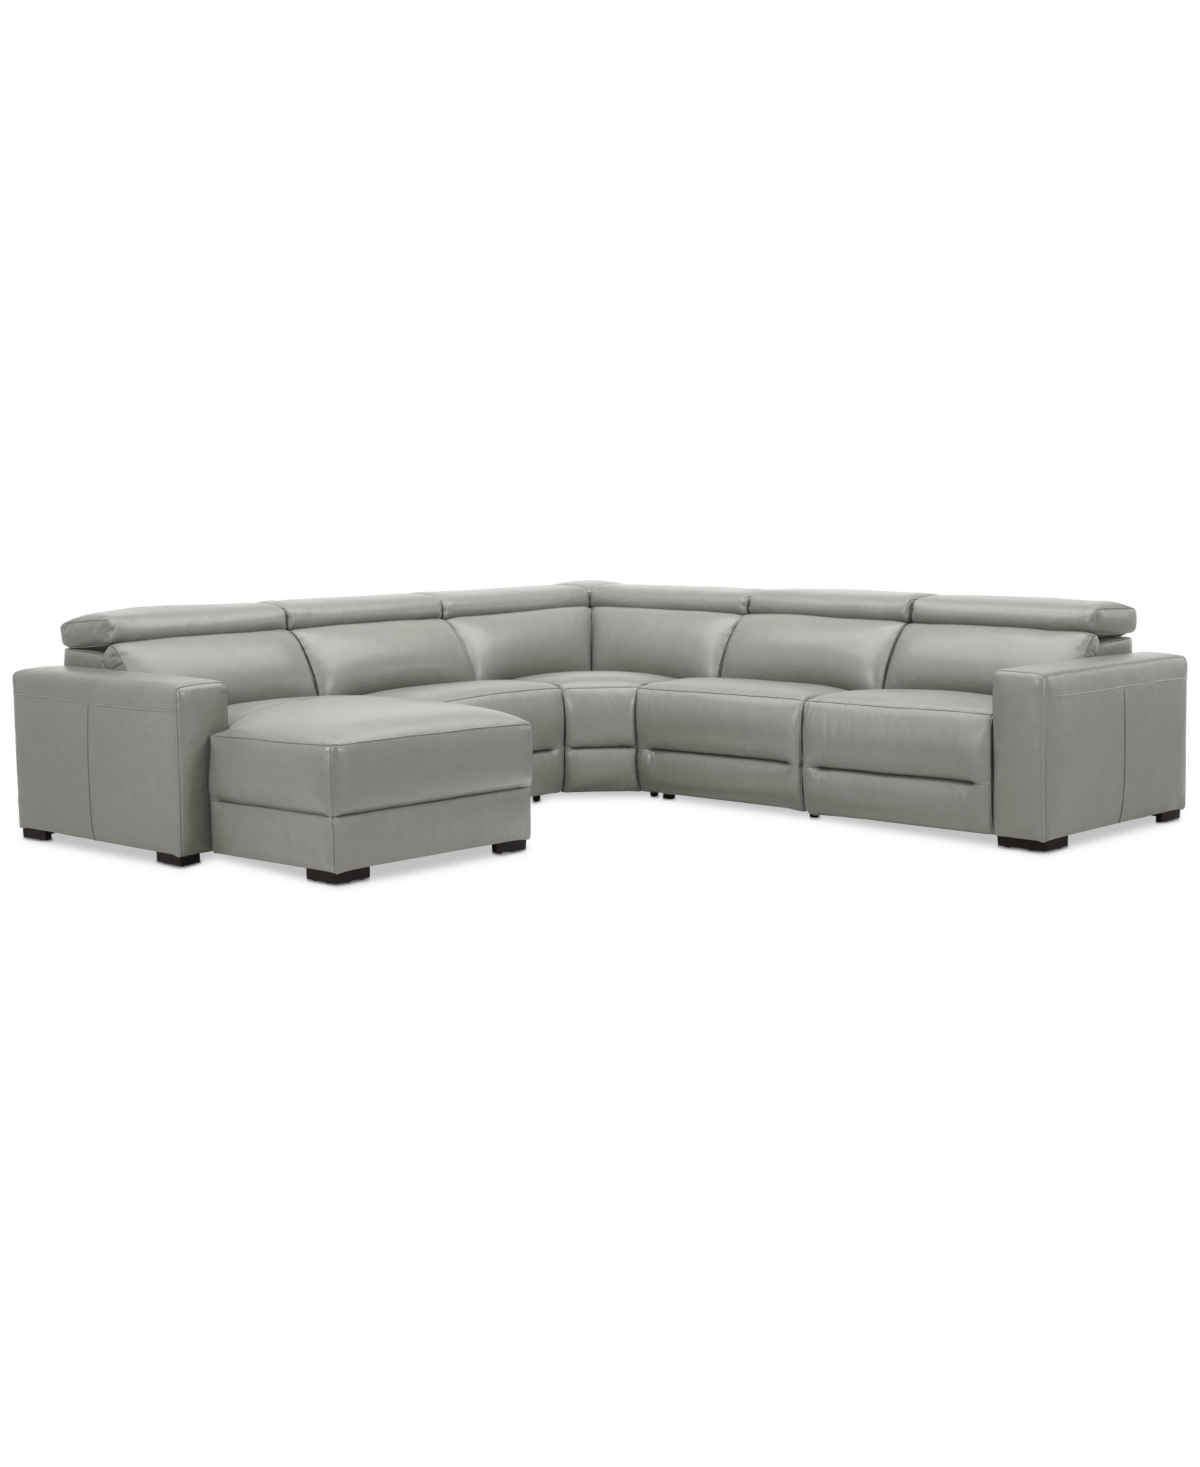 Macy's Nevio 157" 6-pc. Leather Sectional With 2 Power Recliners, Headrests And Chaise, Created For  In Light Grey